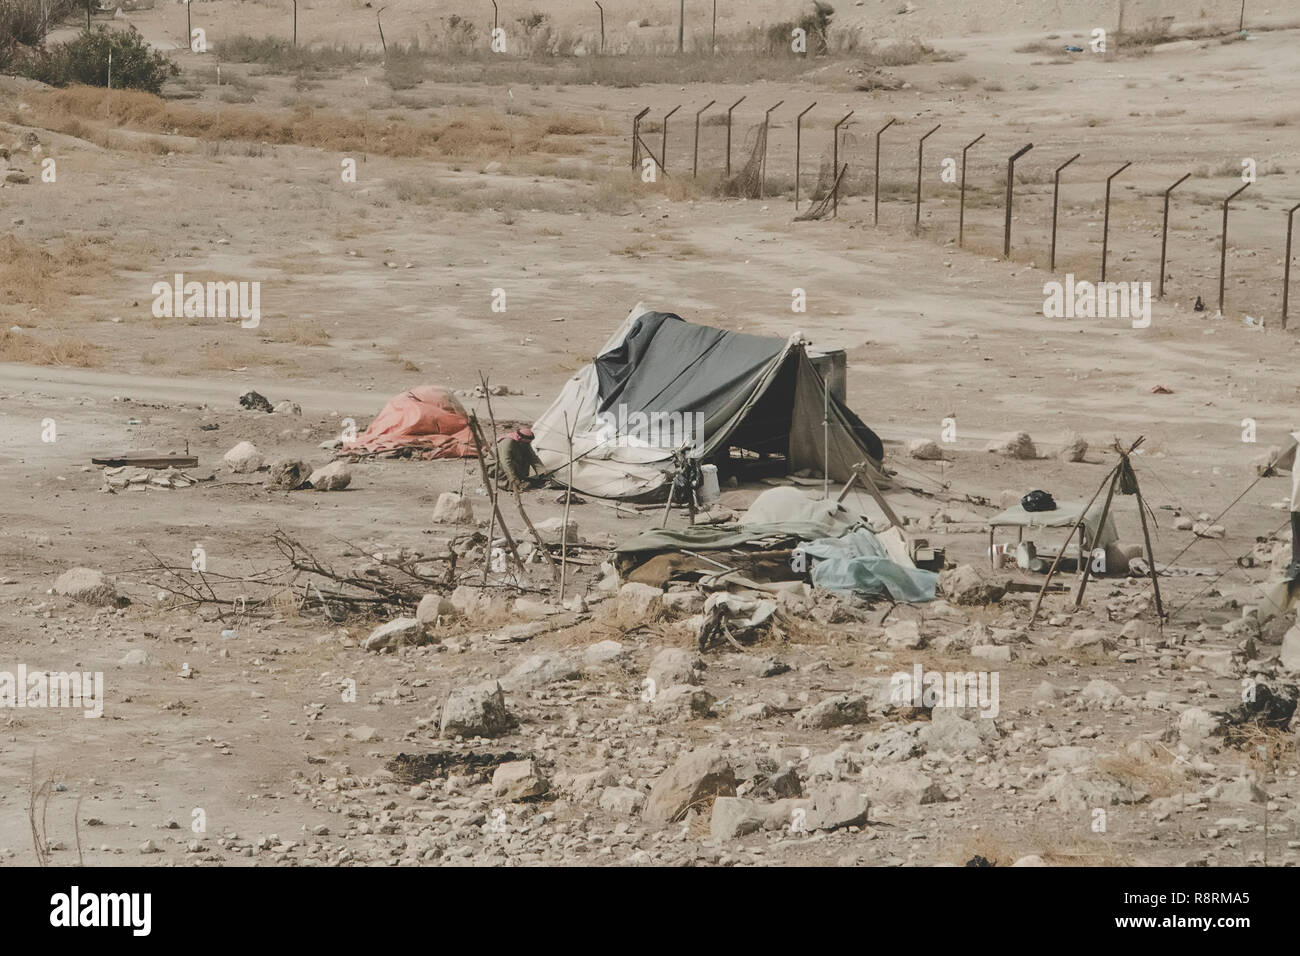 Bedouin houses in the desert near Dead Sea. Poor regions of the world. A indigent Bedouin sitting at the tent. Poverty in Jordan. middle East Stock Photo